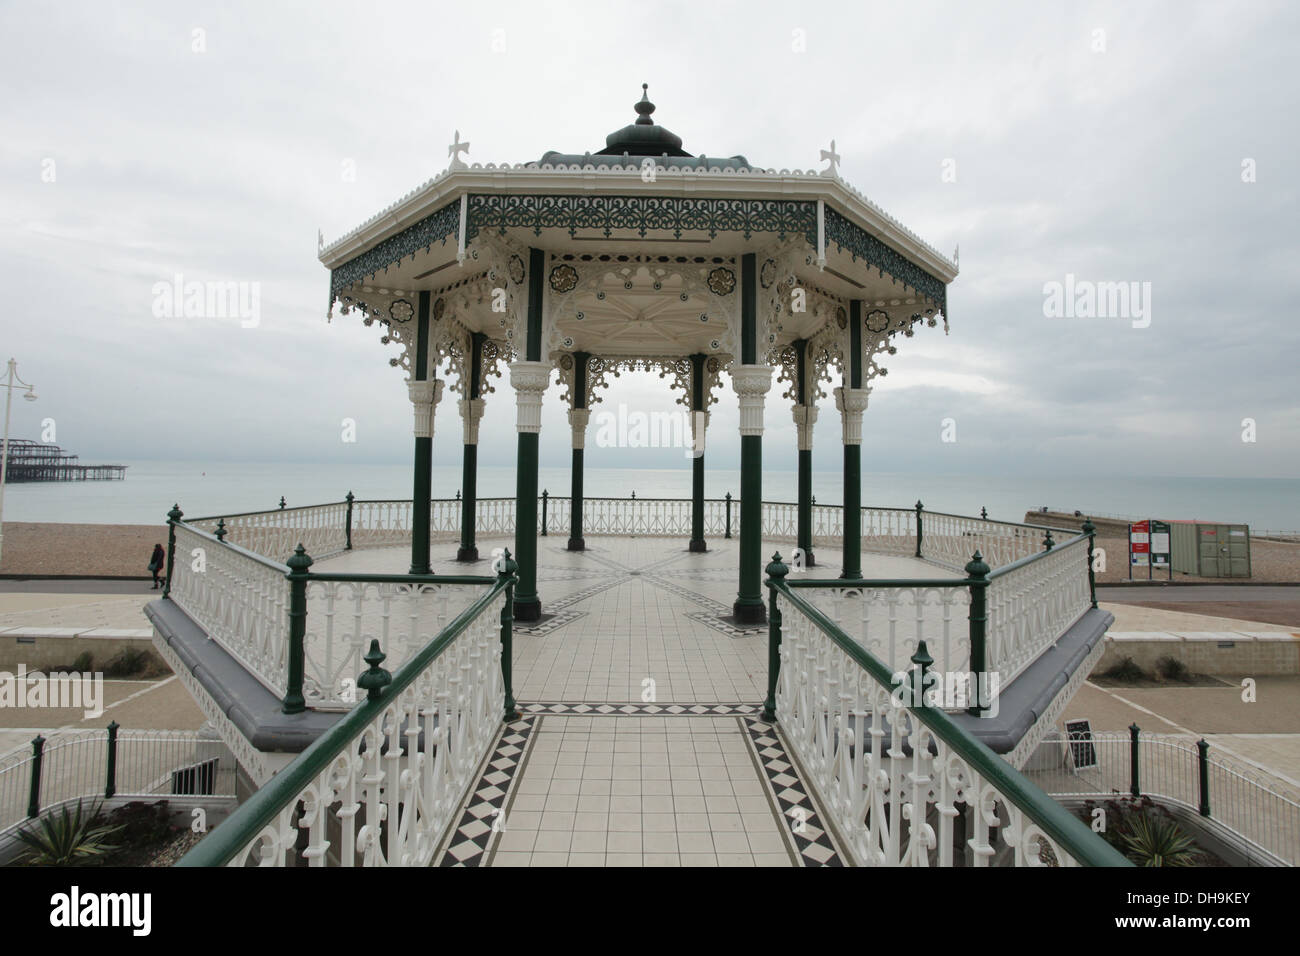 The refurbished bandstand on Brighton, UK seafront Stock Photo